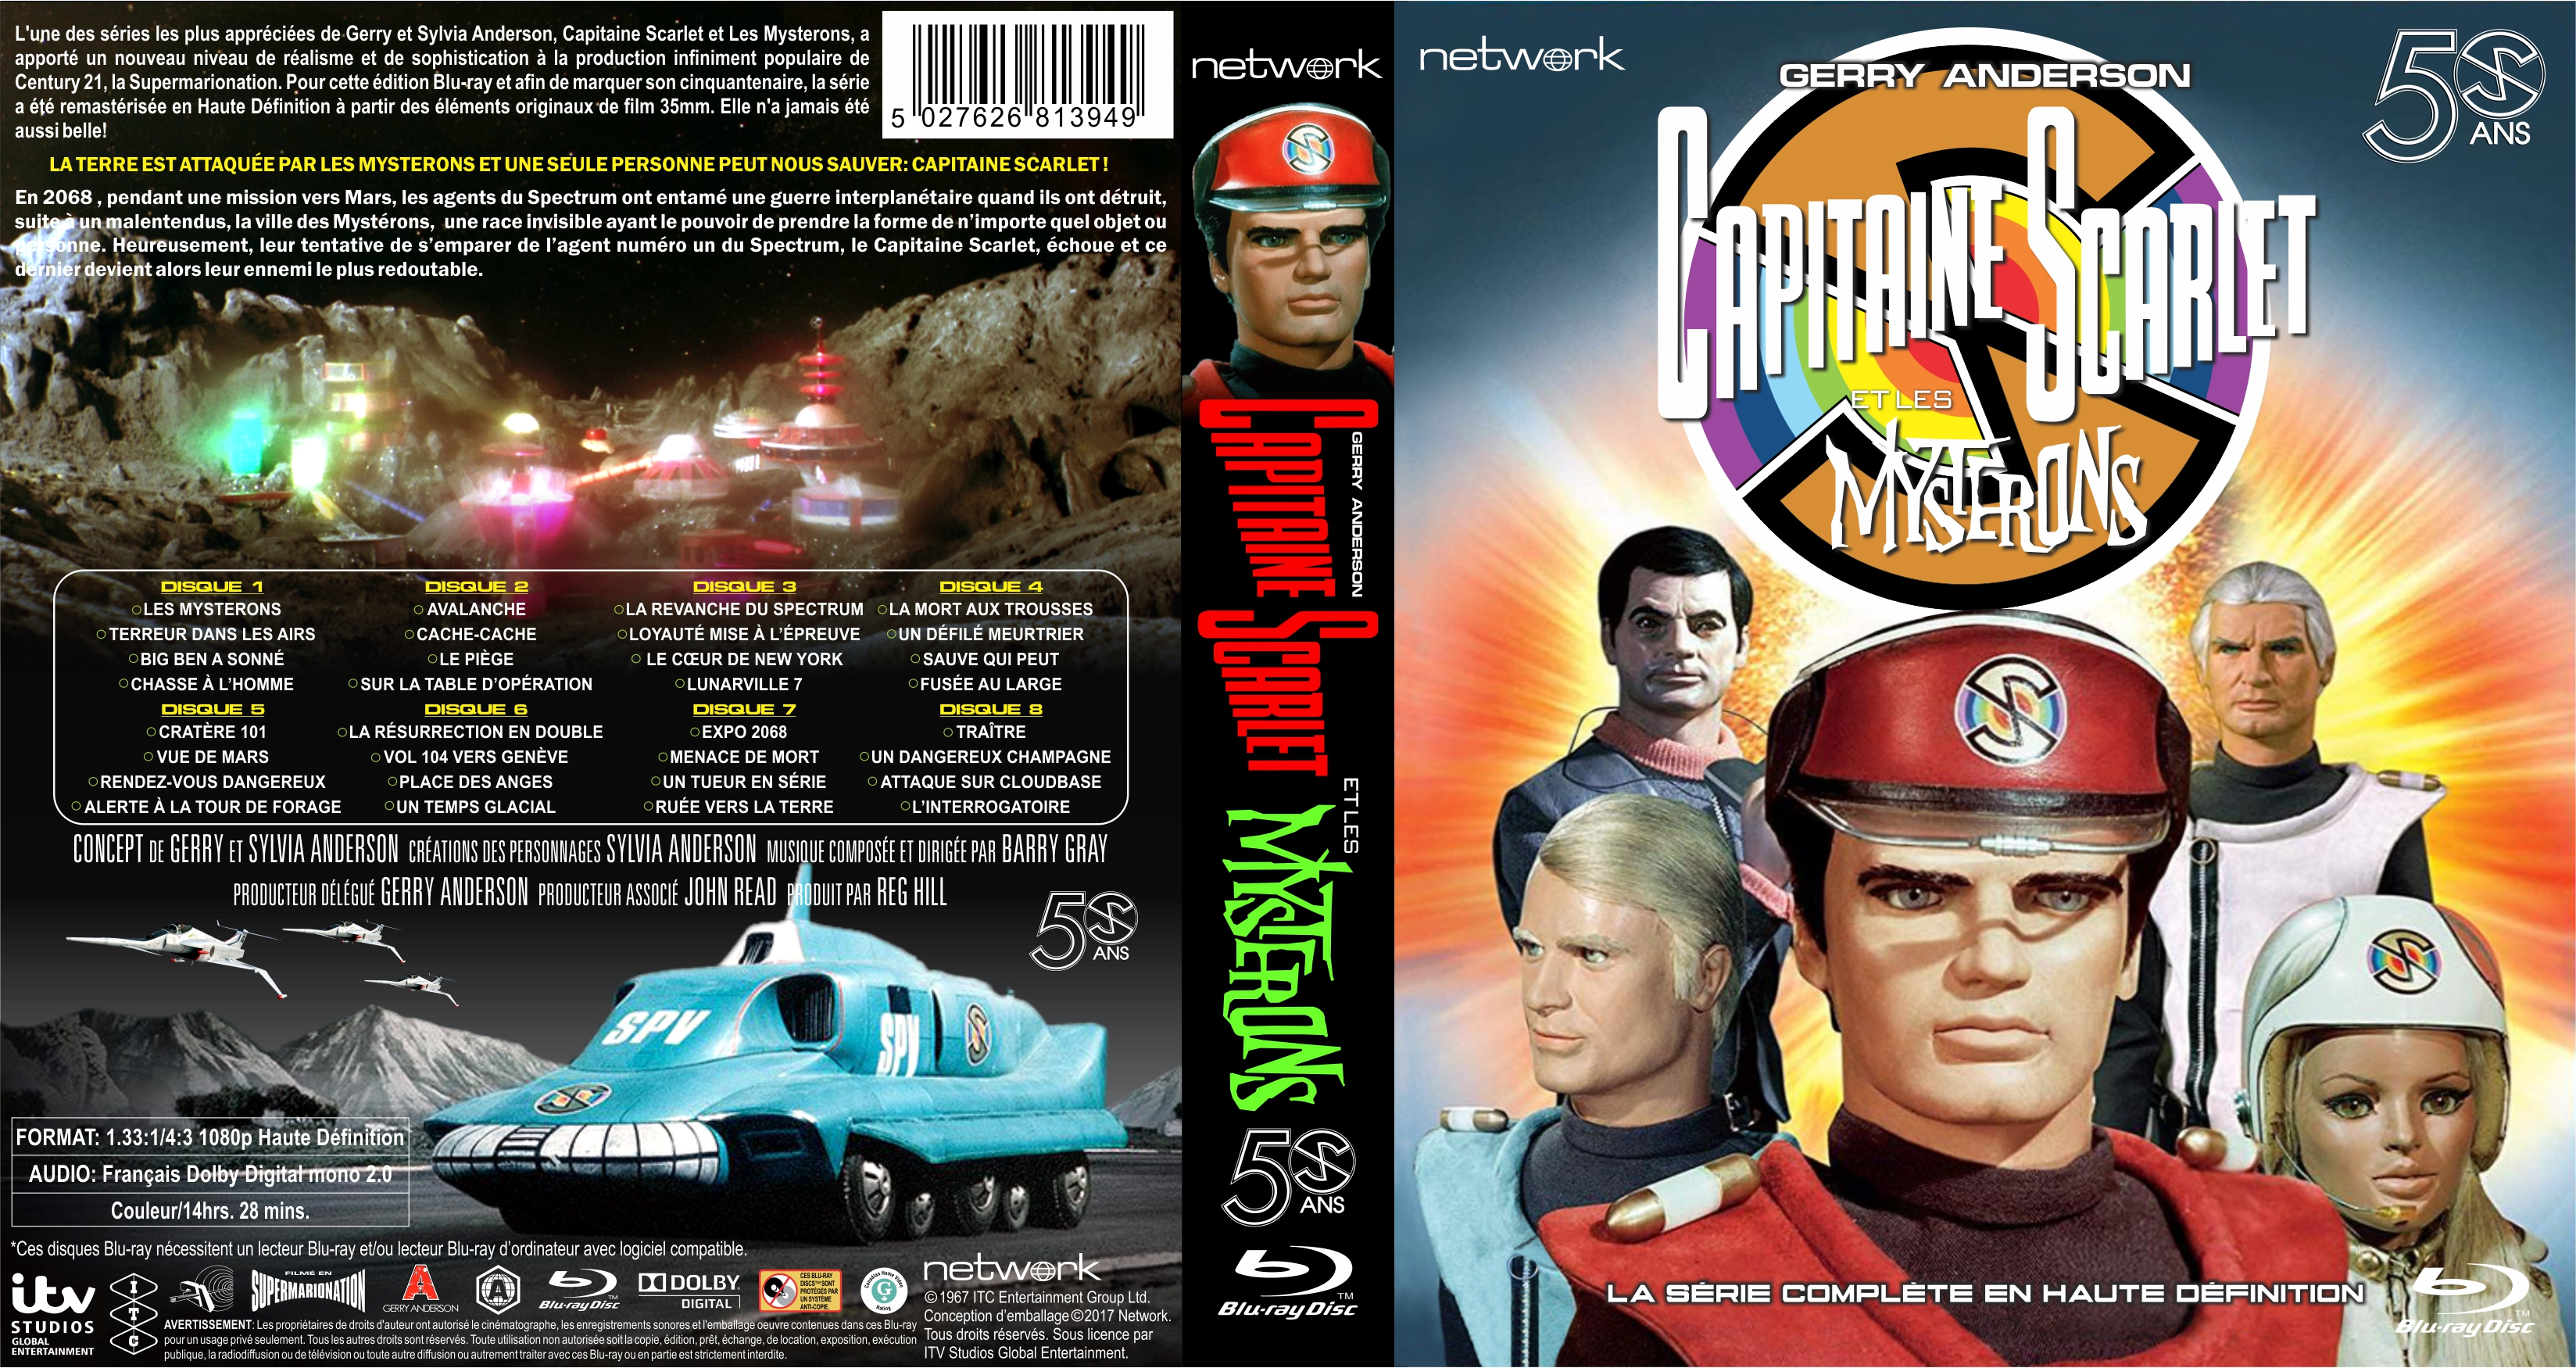 Jaquette DVD Capitaine Scarlet et les mysterons custom (BLU-RAY)